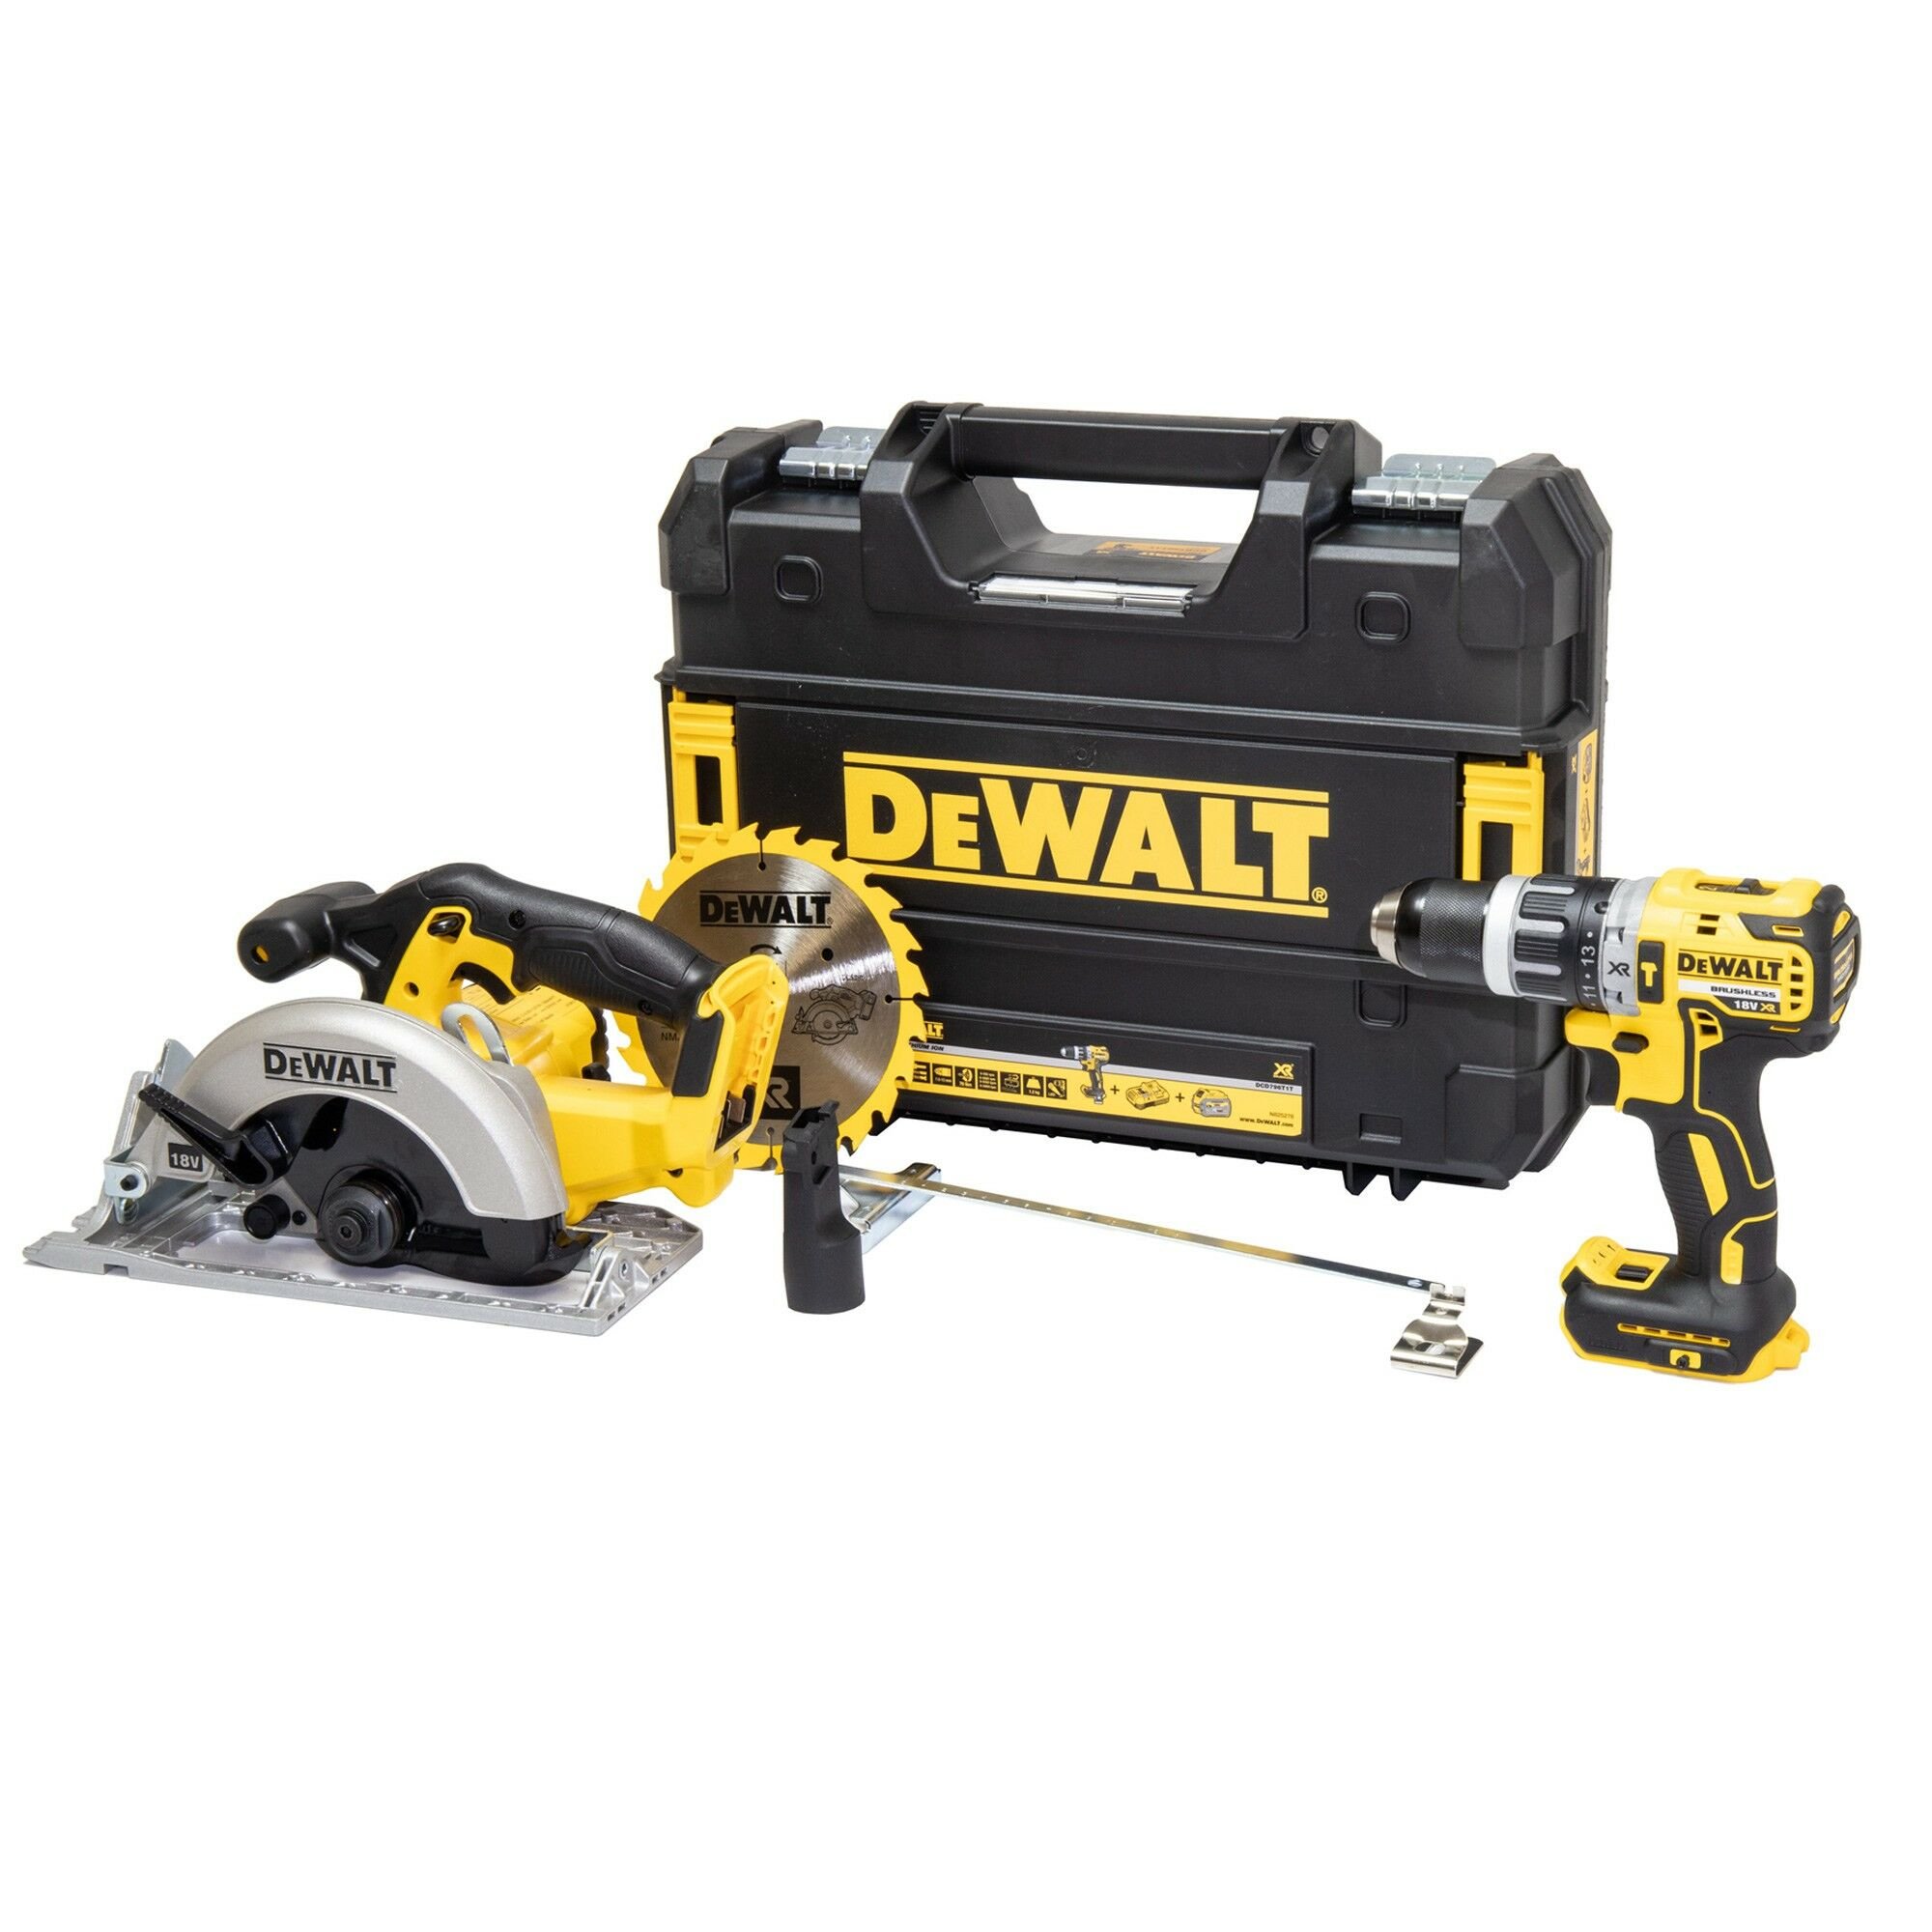 DeWalt DCD796NT-K4 18V Combi Drill and Circular Saw (Body Only) with Case